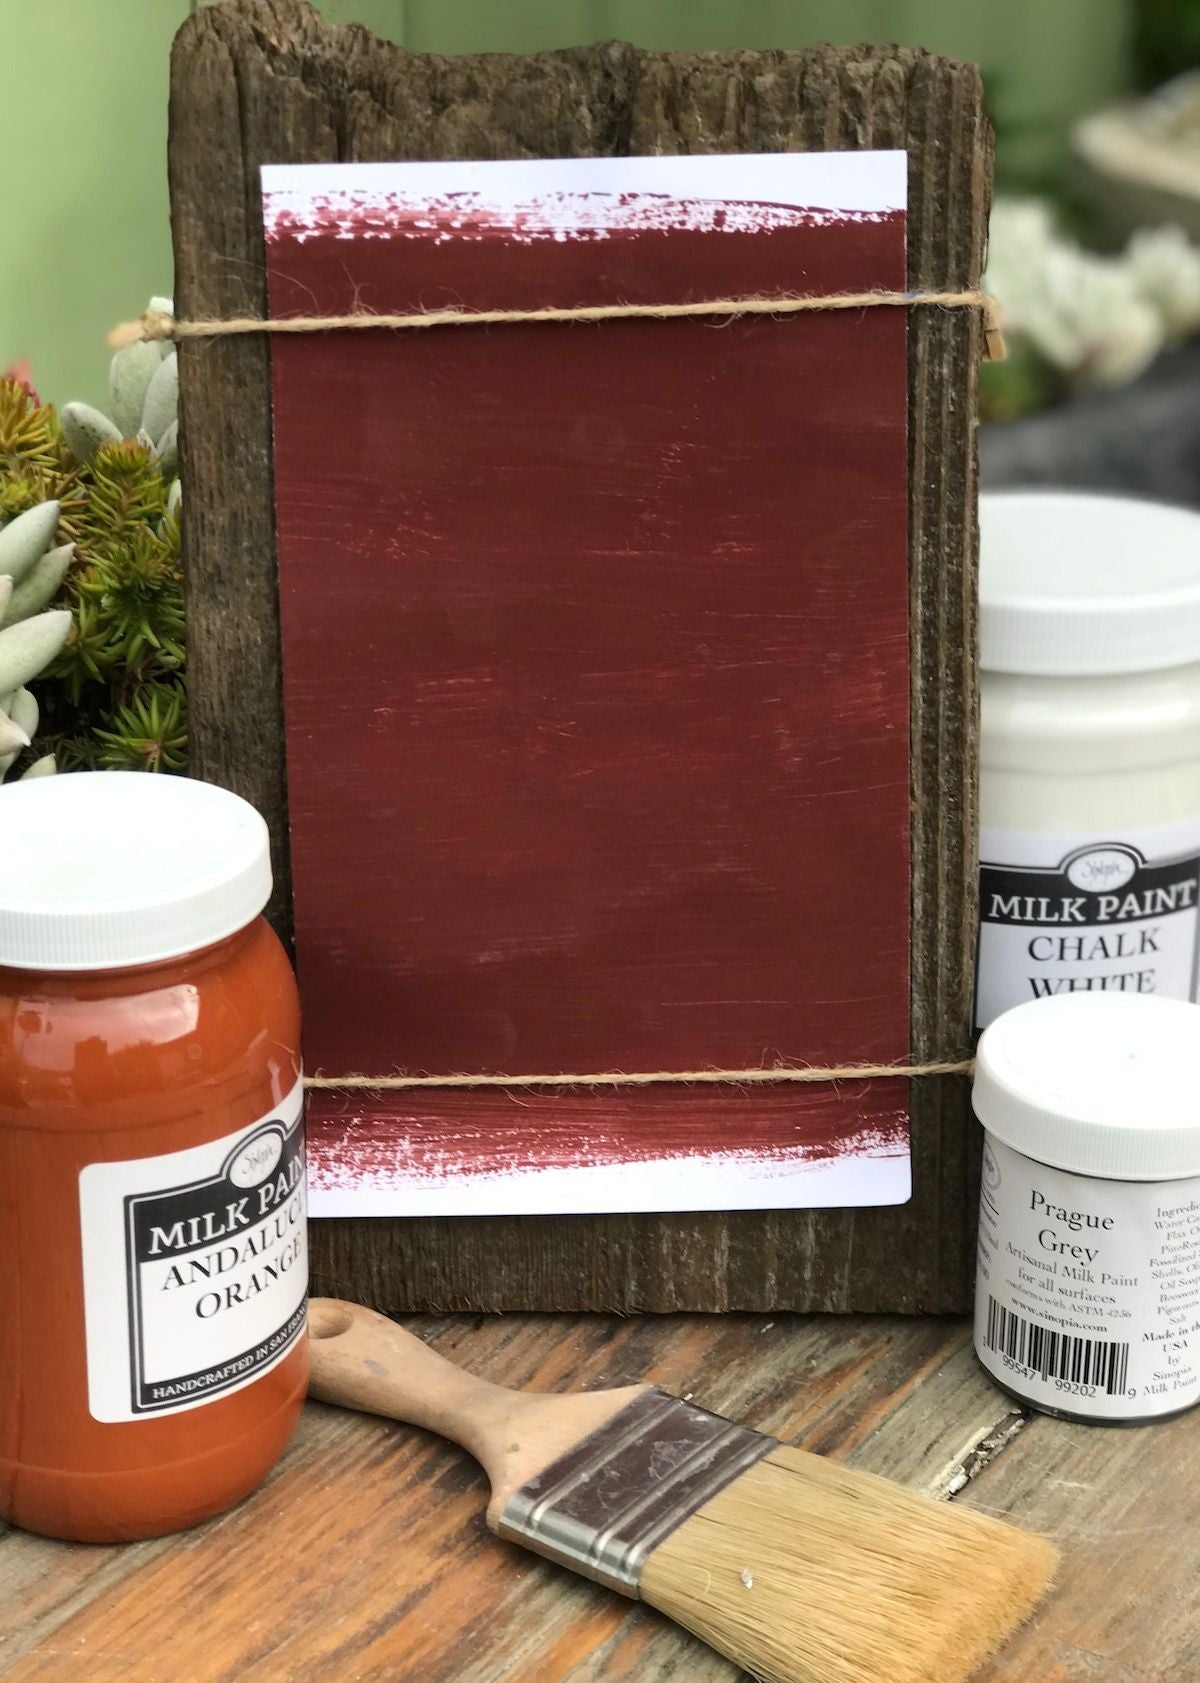 Milk Paint Turkish Red is available at Natural Art Supplies